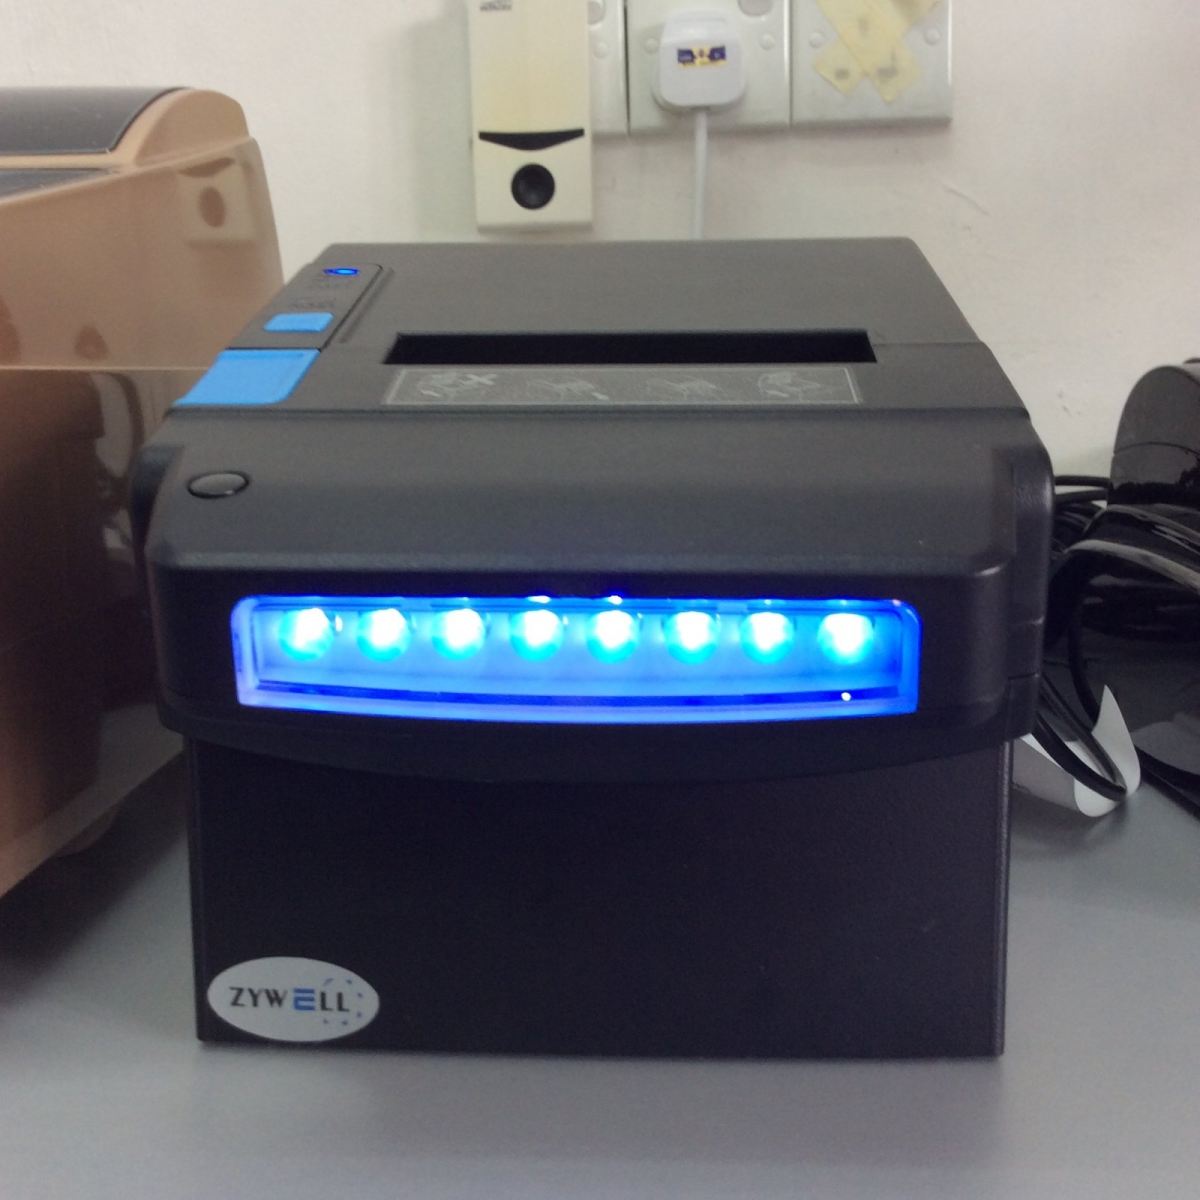 Thermal Receipt Printer with money detectors